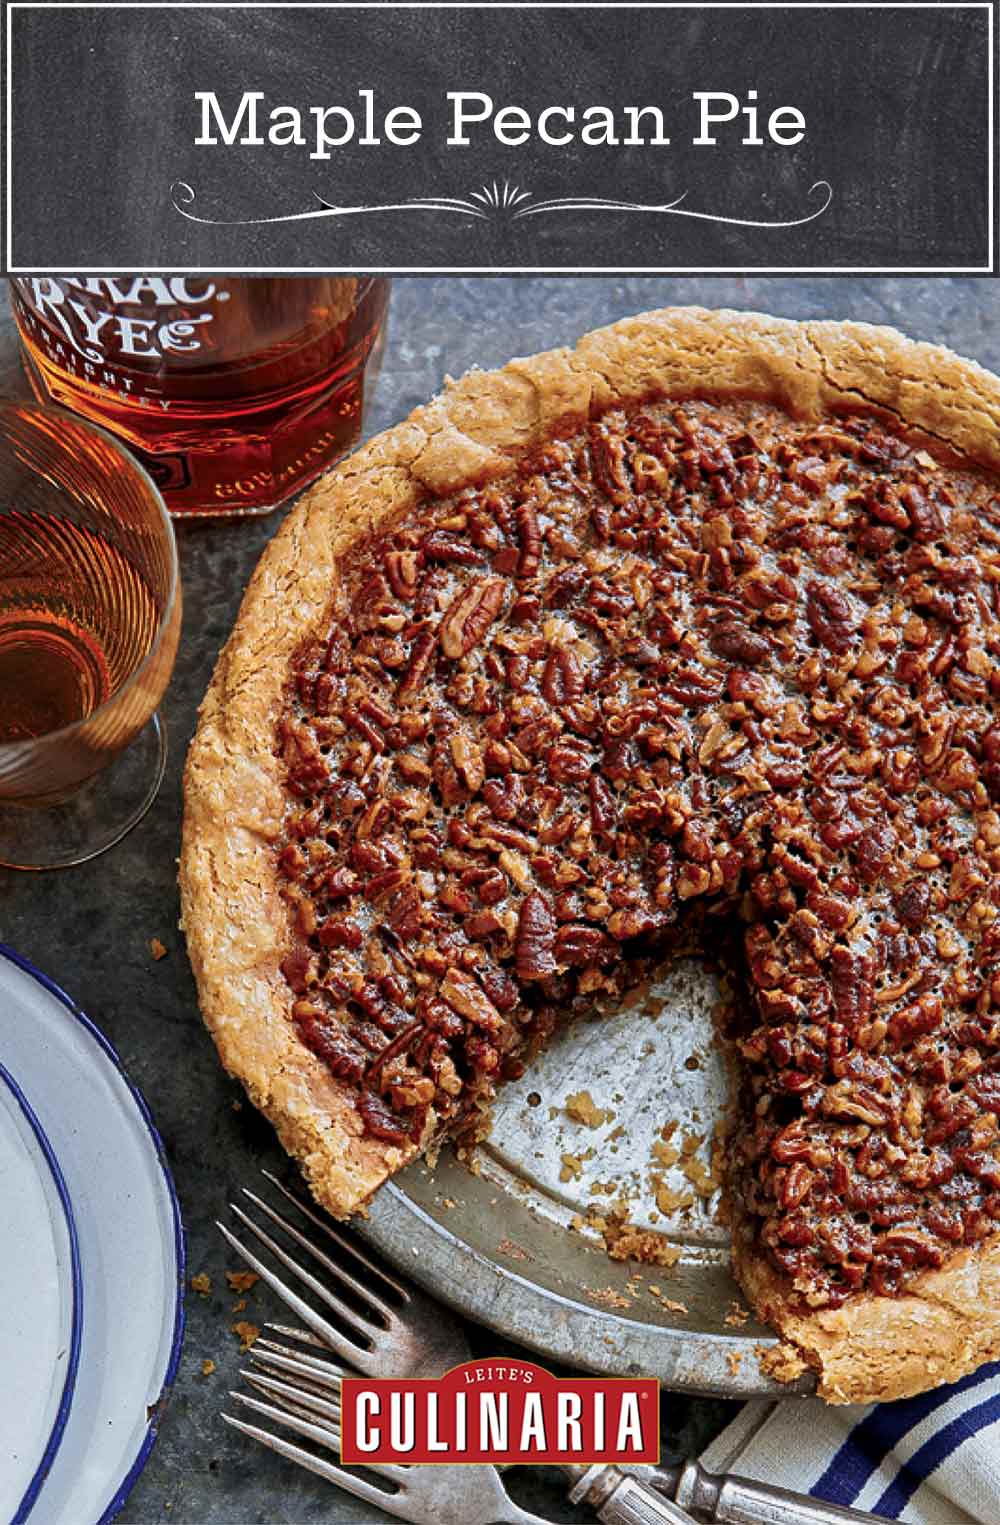 A maple pecan pie in a metal pie plate with one slice missing and forks, plates, and a bottle of rye whiskey beside the pie.